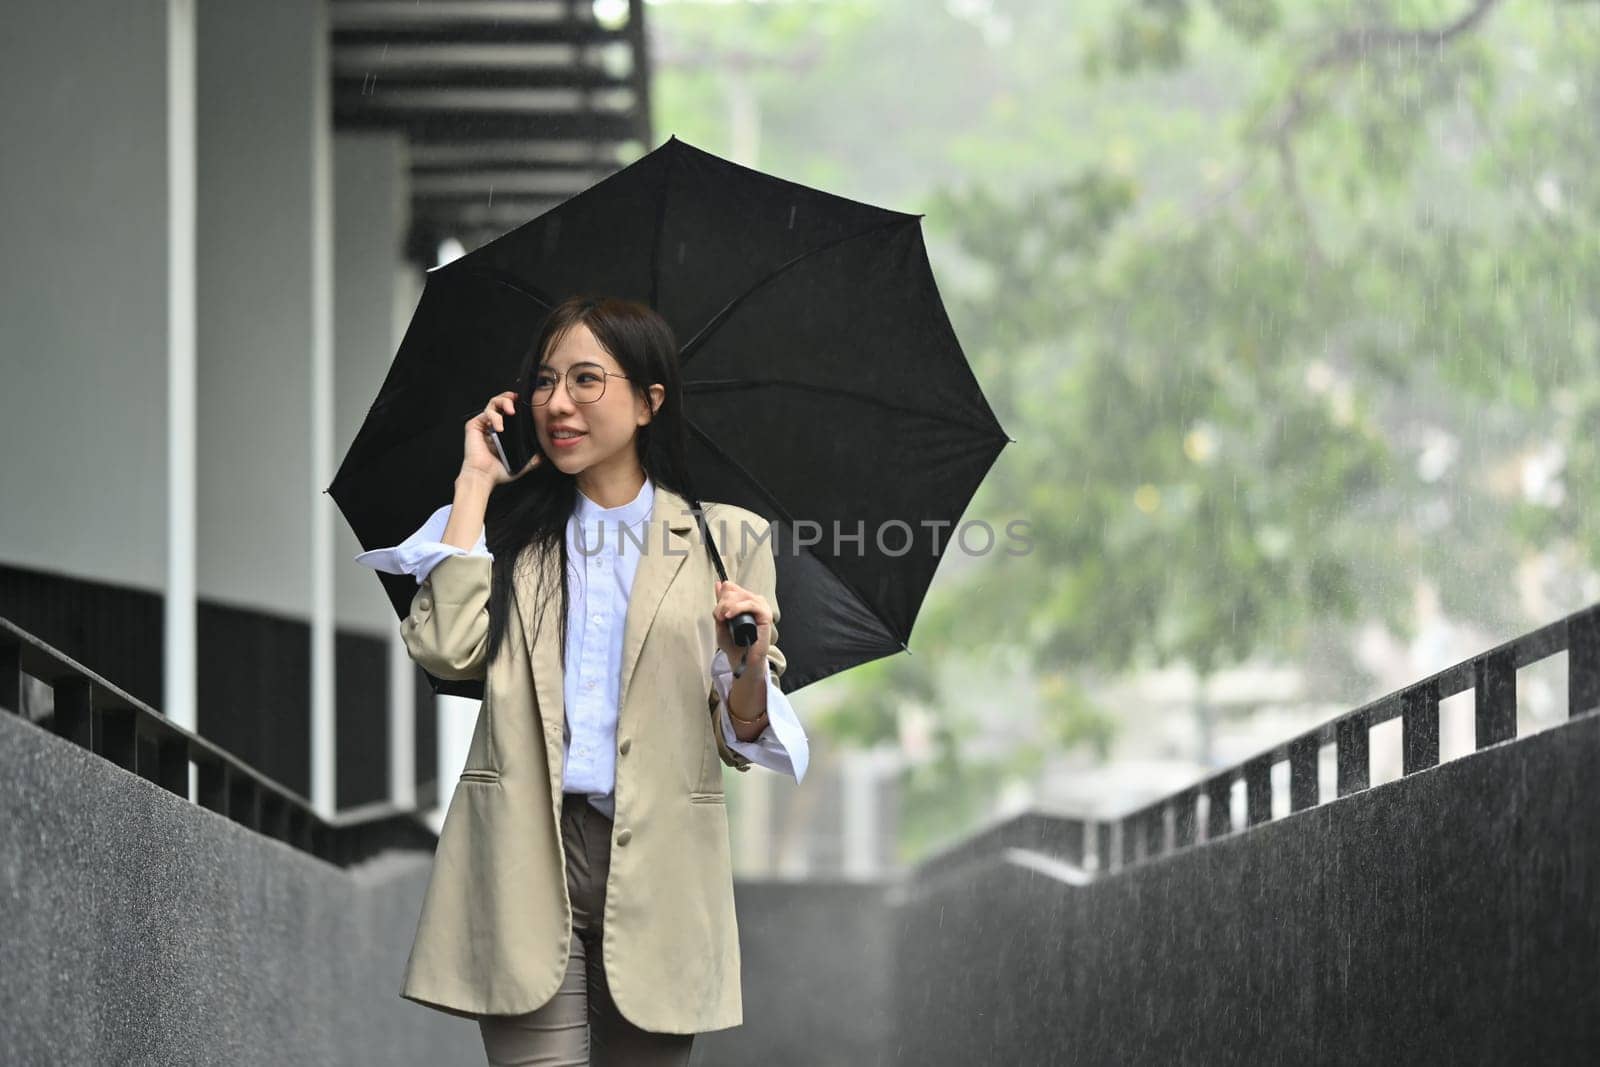 Gorgeous millennial businesswoman talking on mobile phone under umbrella while walking in the city on rainy day.